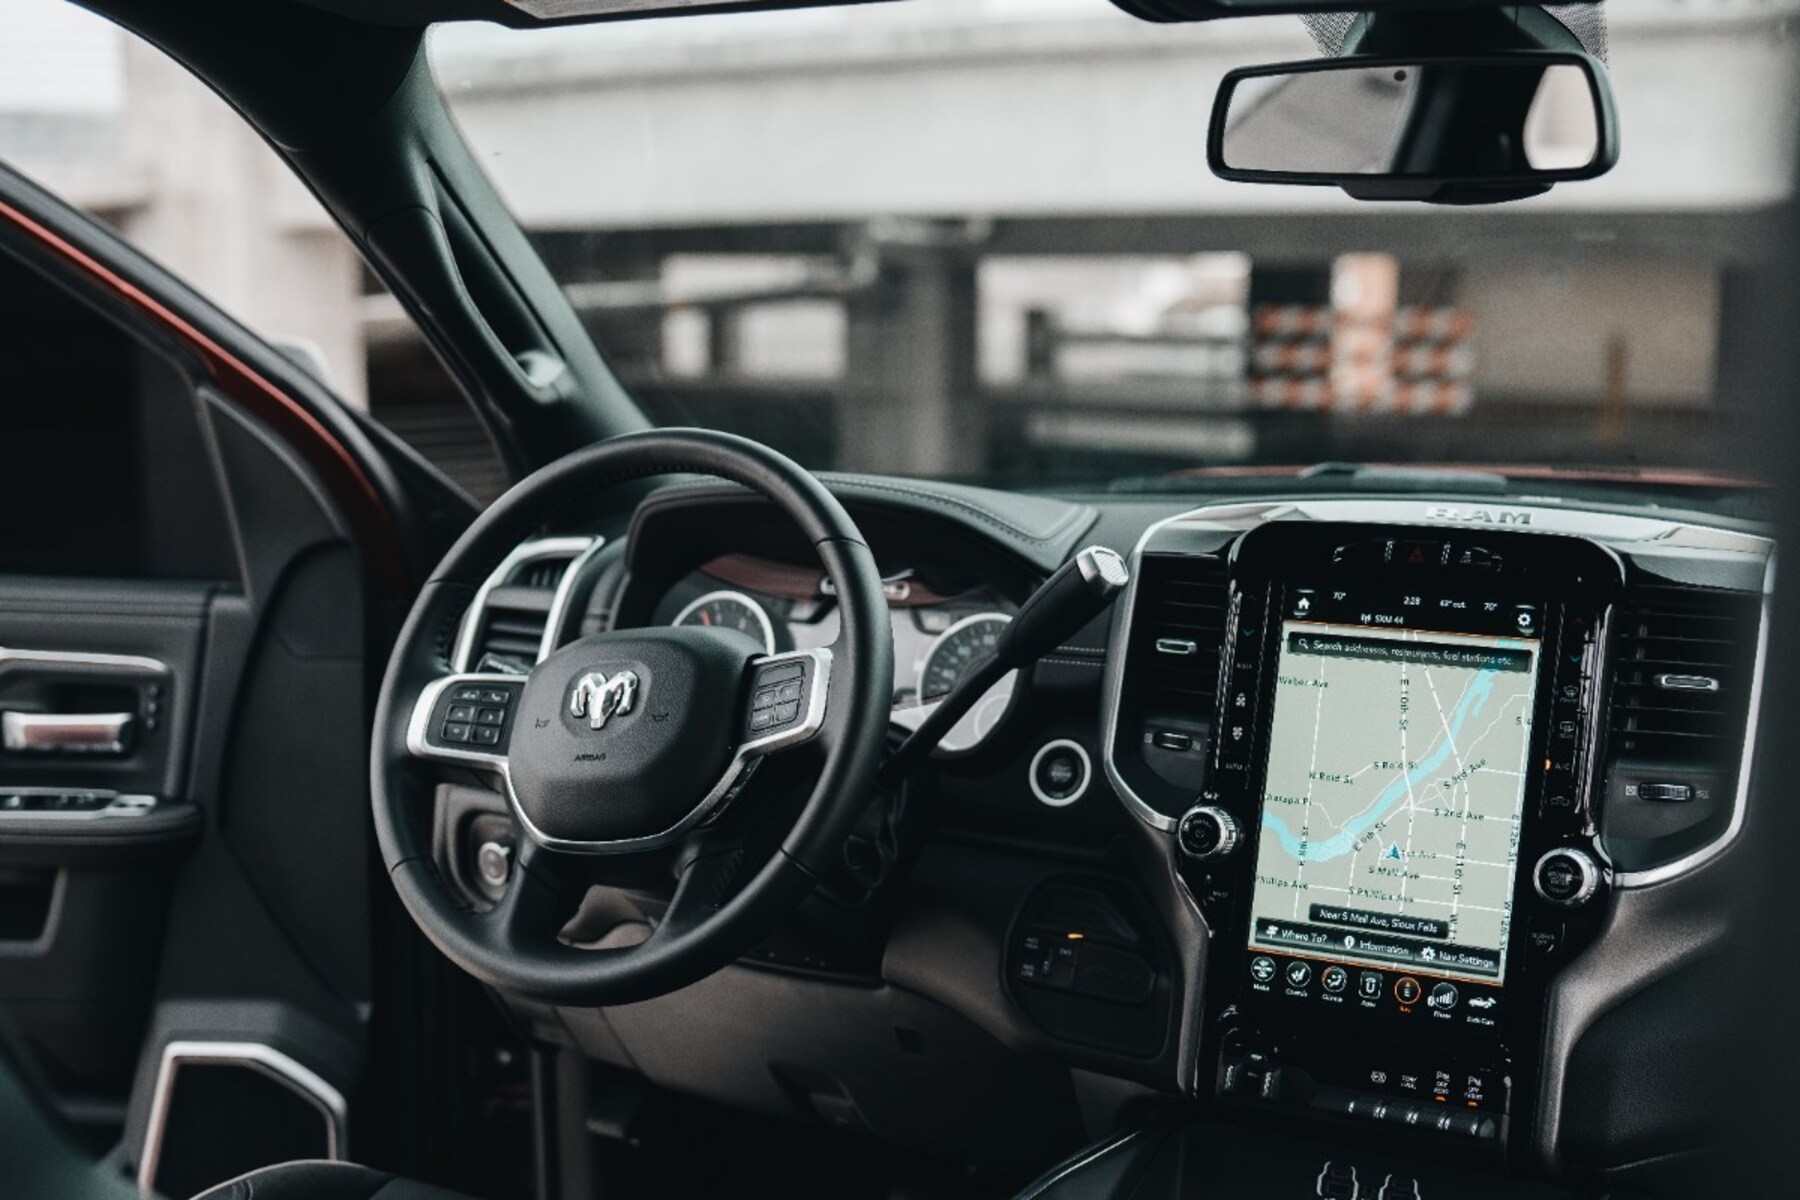 Detective Work: How To Locate A GPS Tracker On Your Car